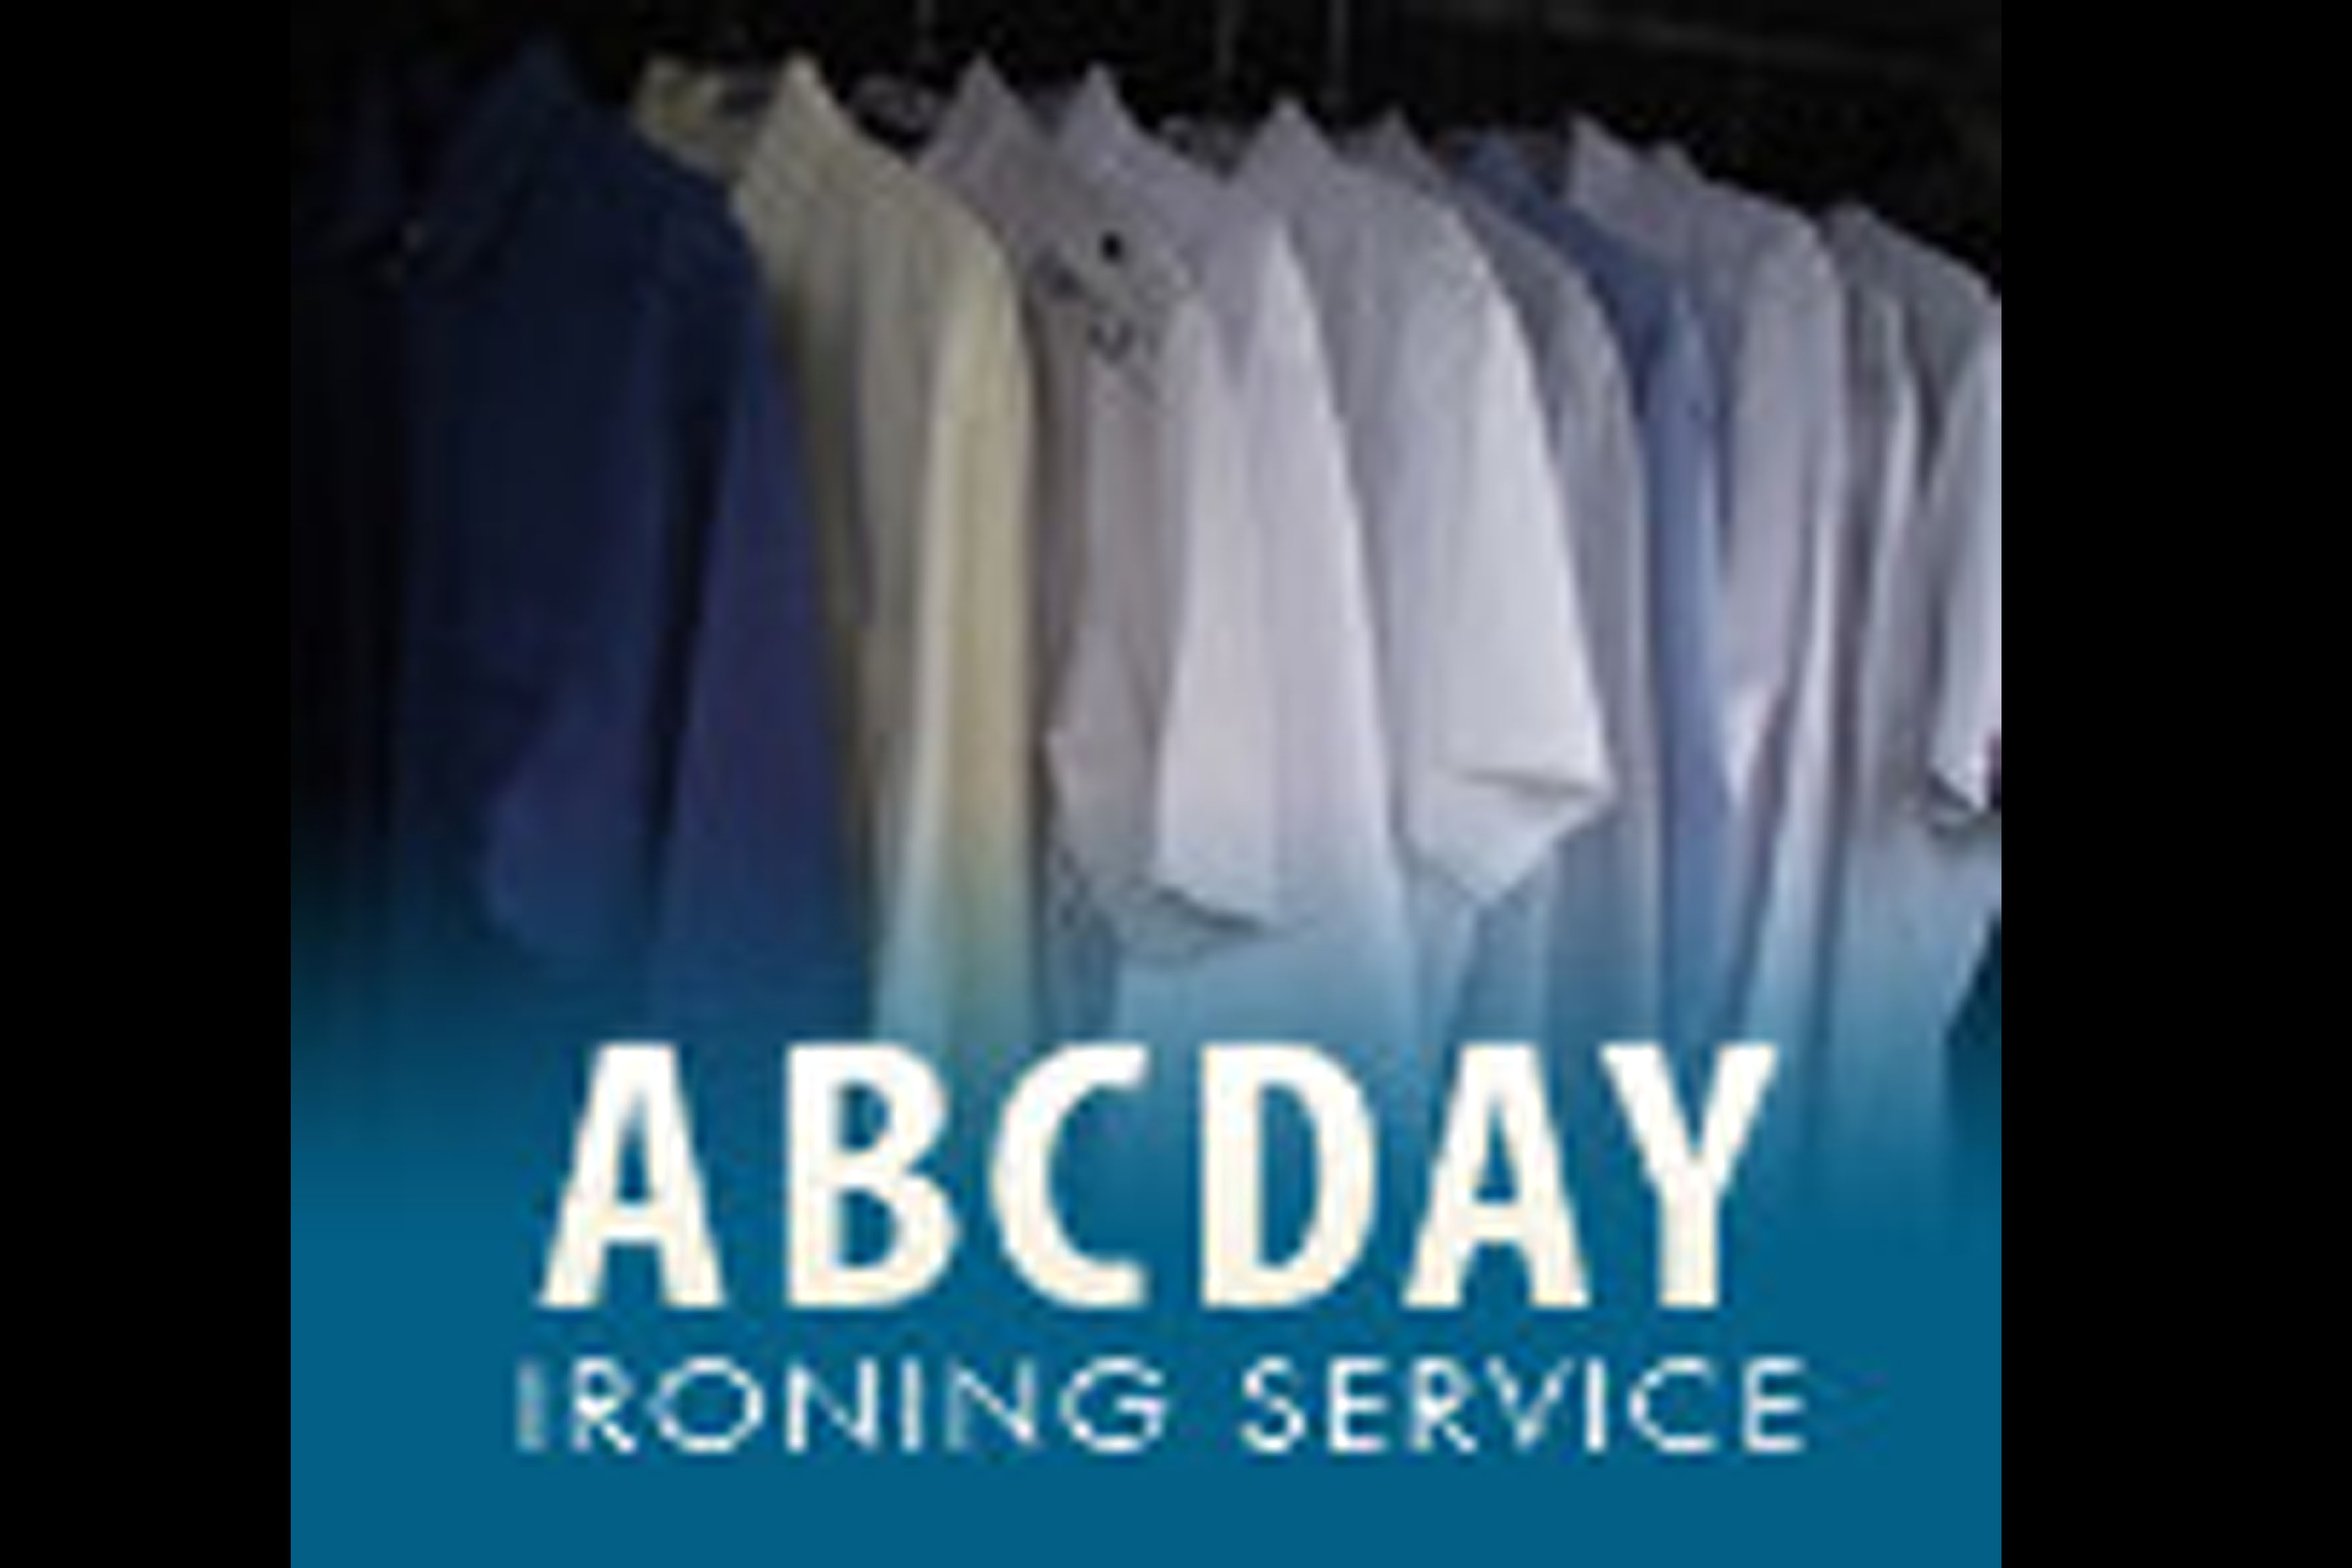 ABCDAY IRONING SERVICES